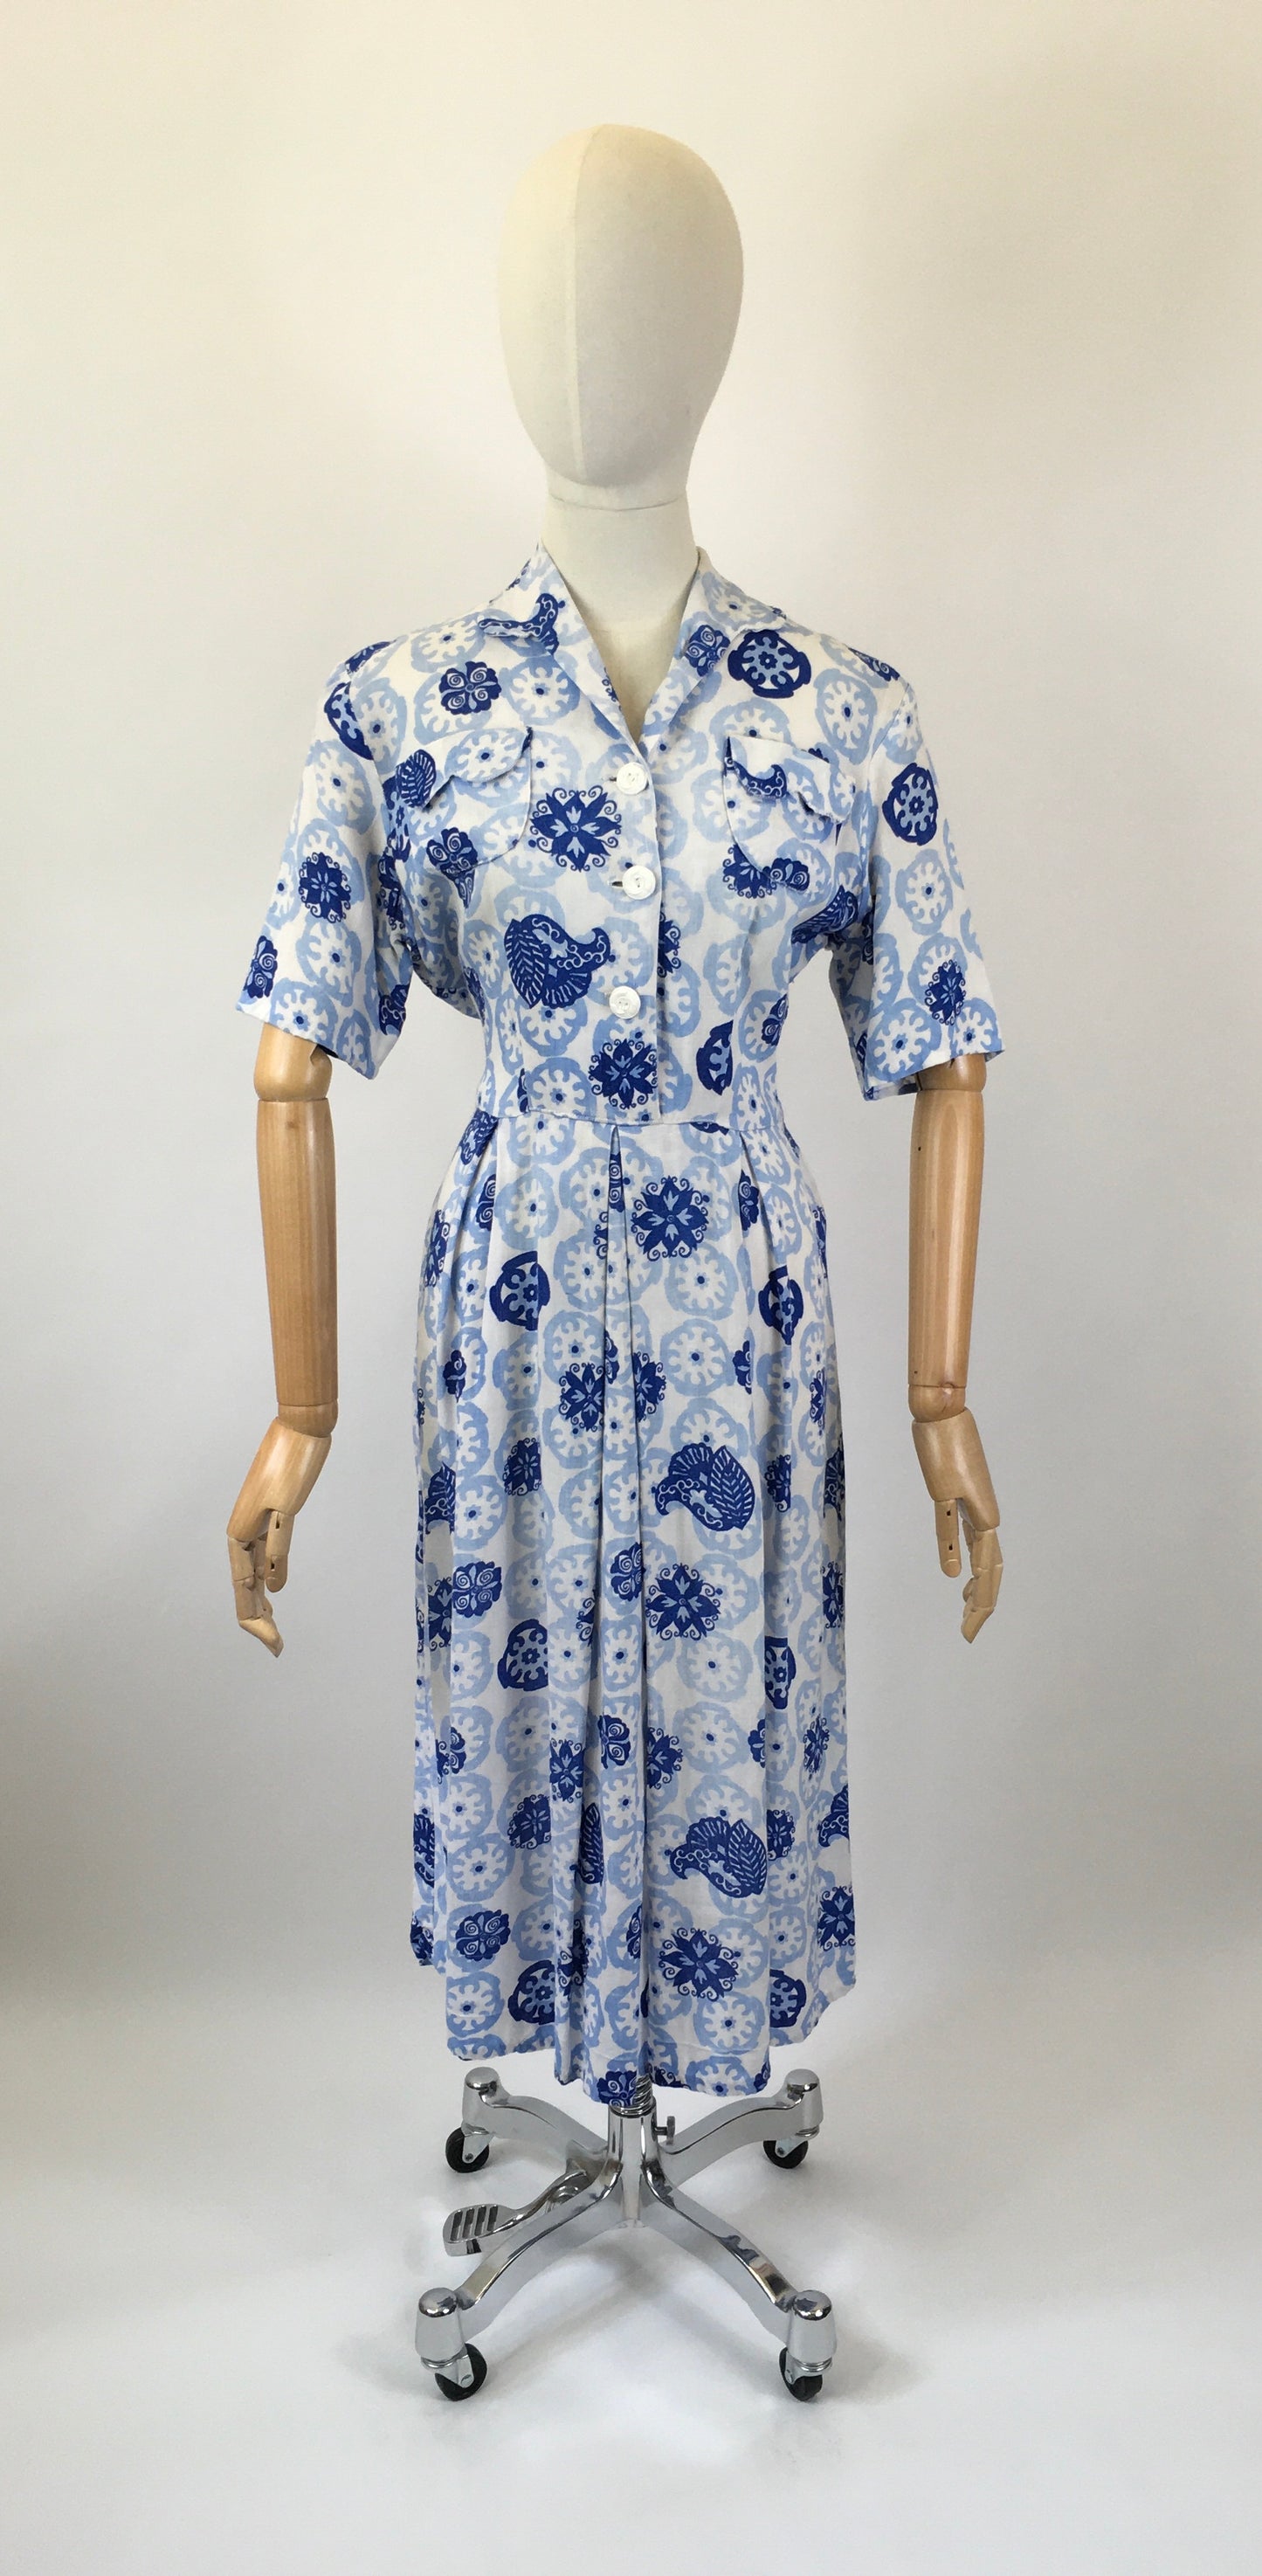 Original 1940's Stunning Day Dress - In A Beautiful Moygashol Linen in Navy and Powder Blue